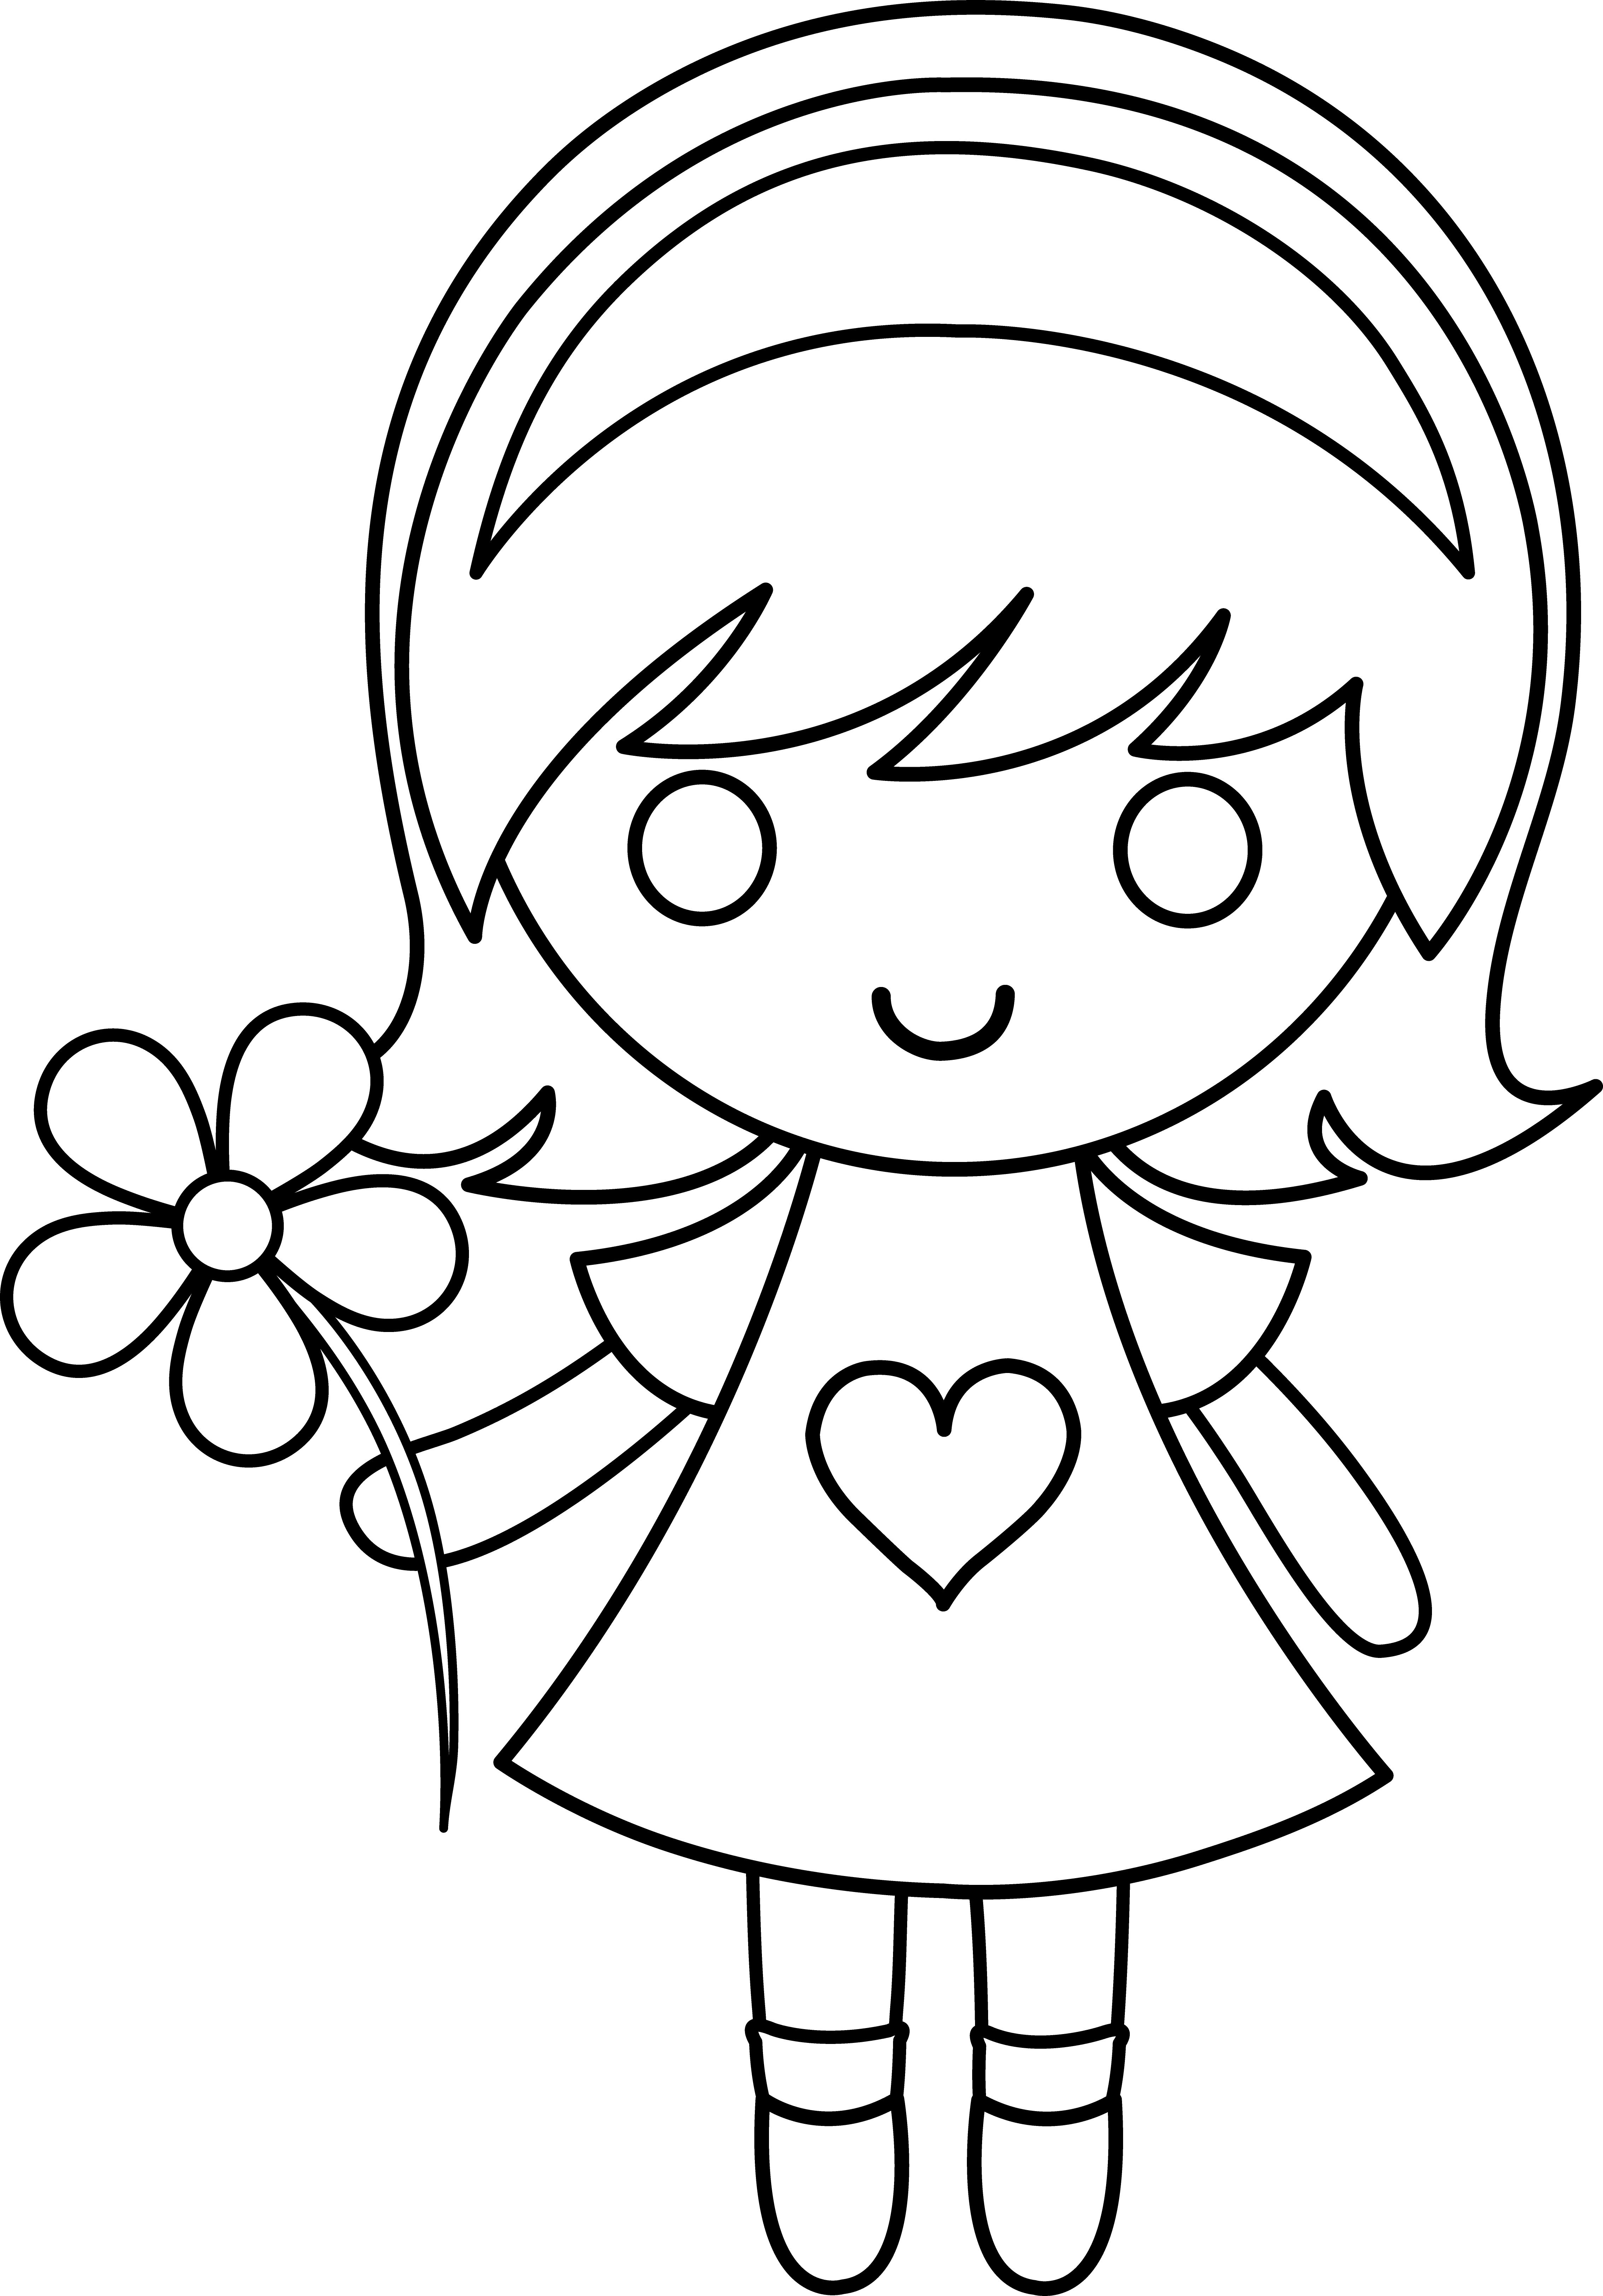 Daisy girl colorable line. Resume clipart drawing